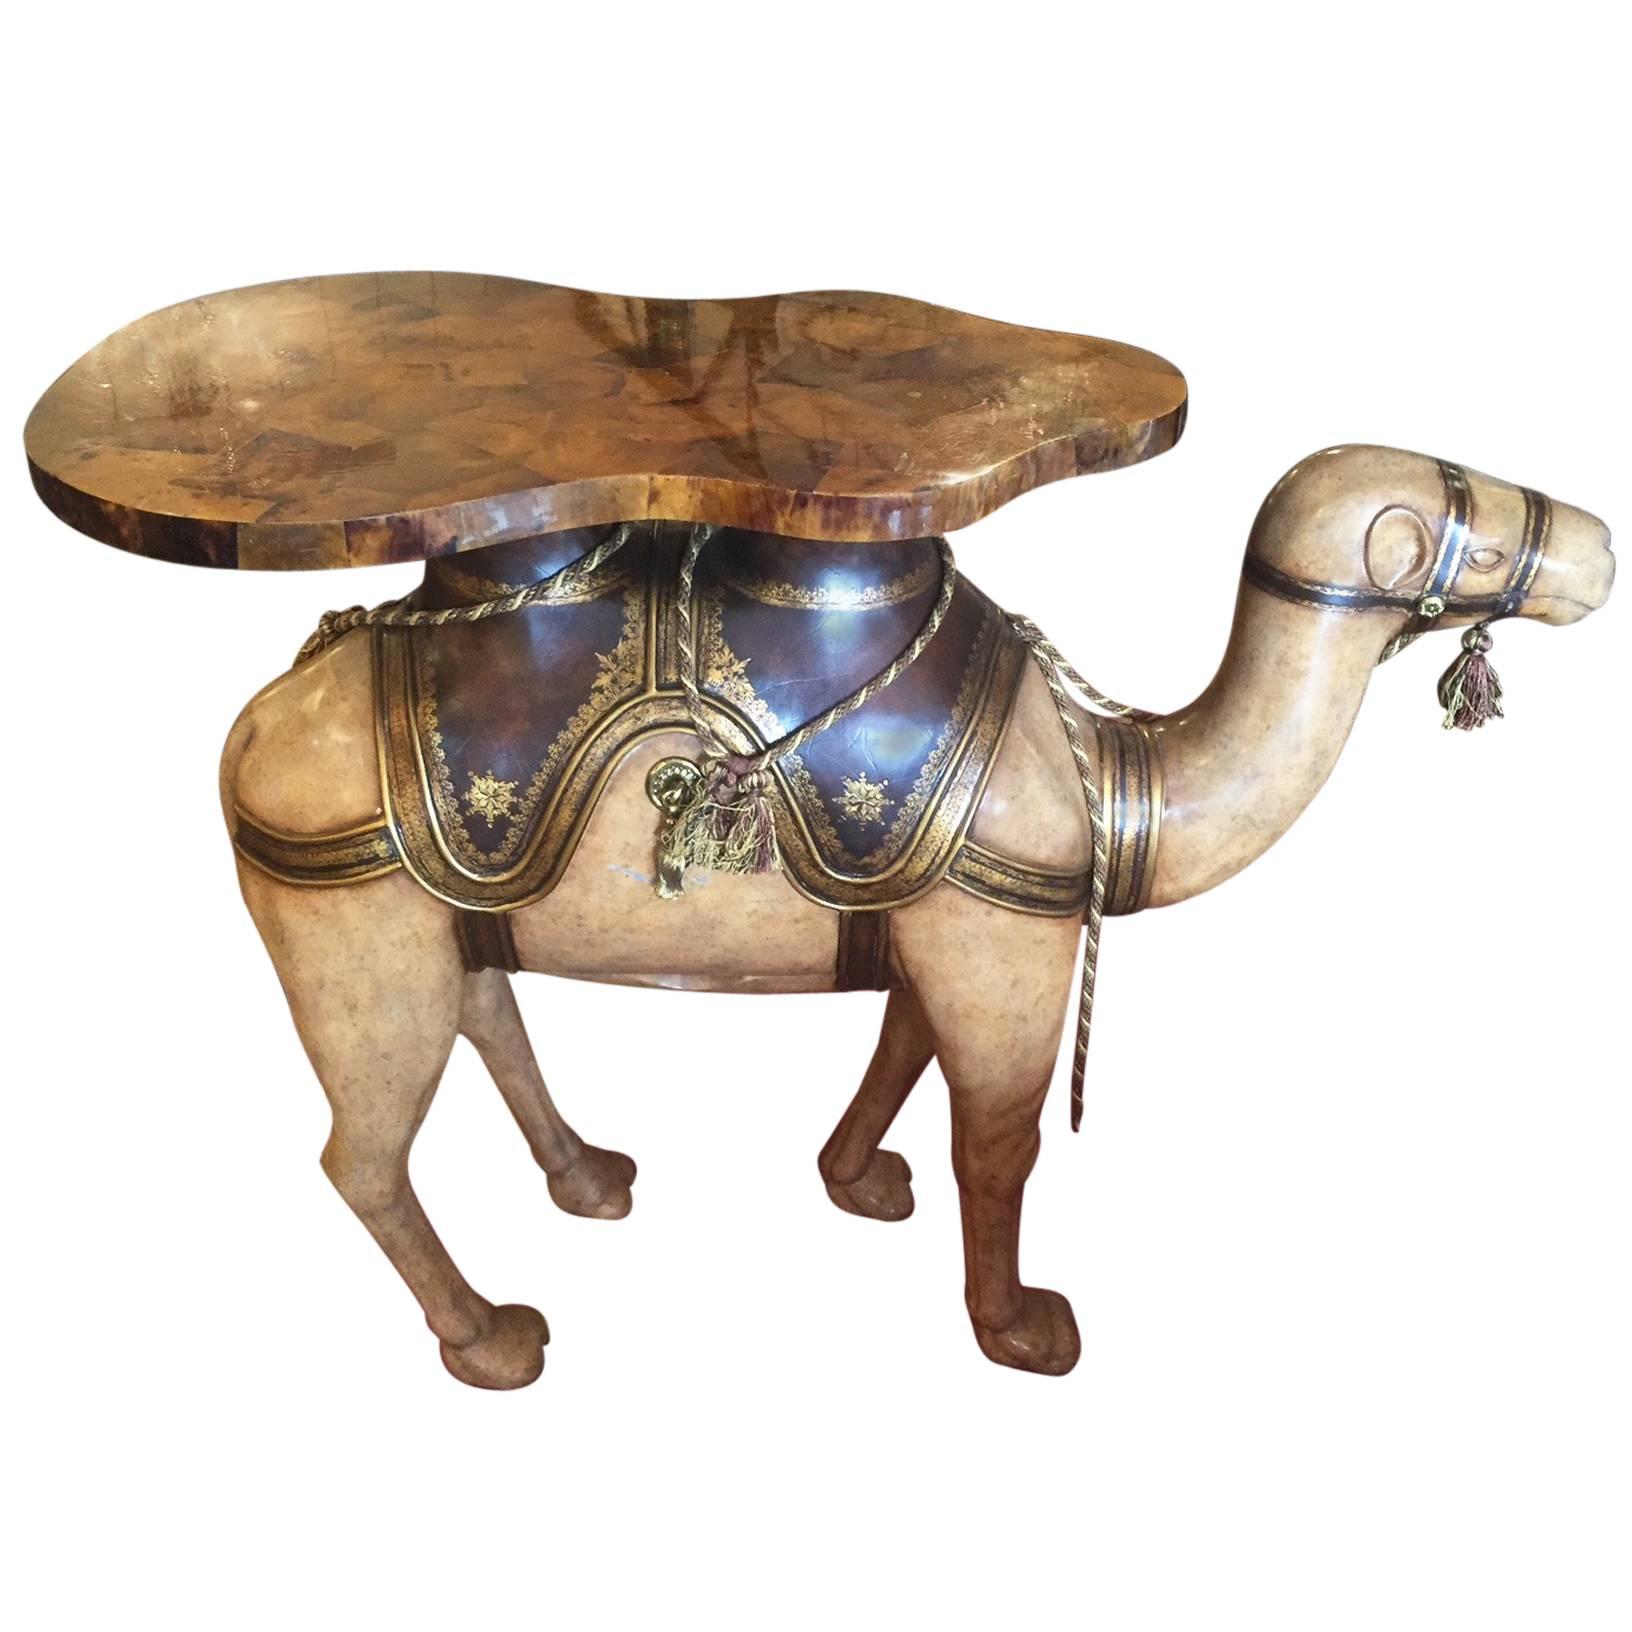 Maitland-Smith Polychrome Paint Decorated Camel Serving Table